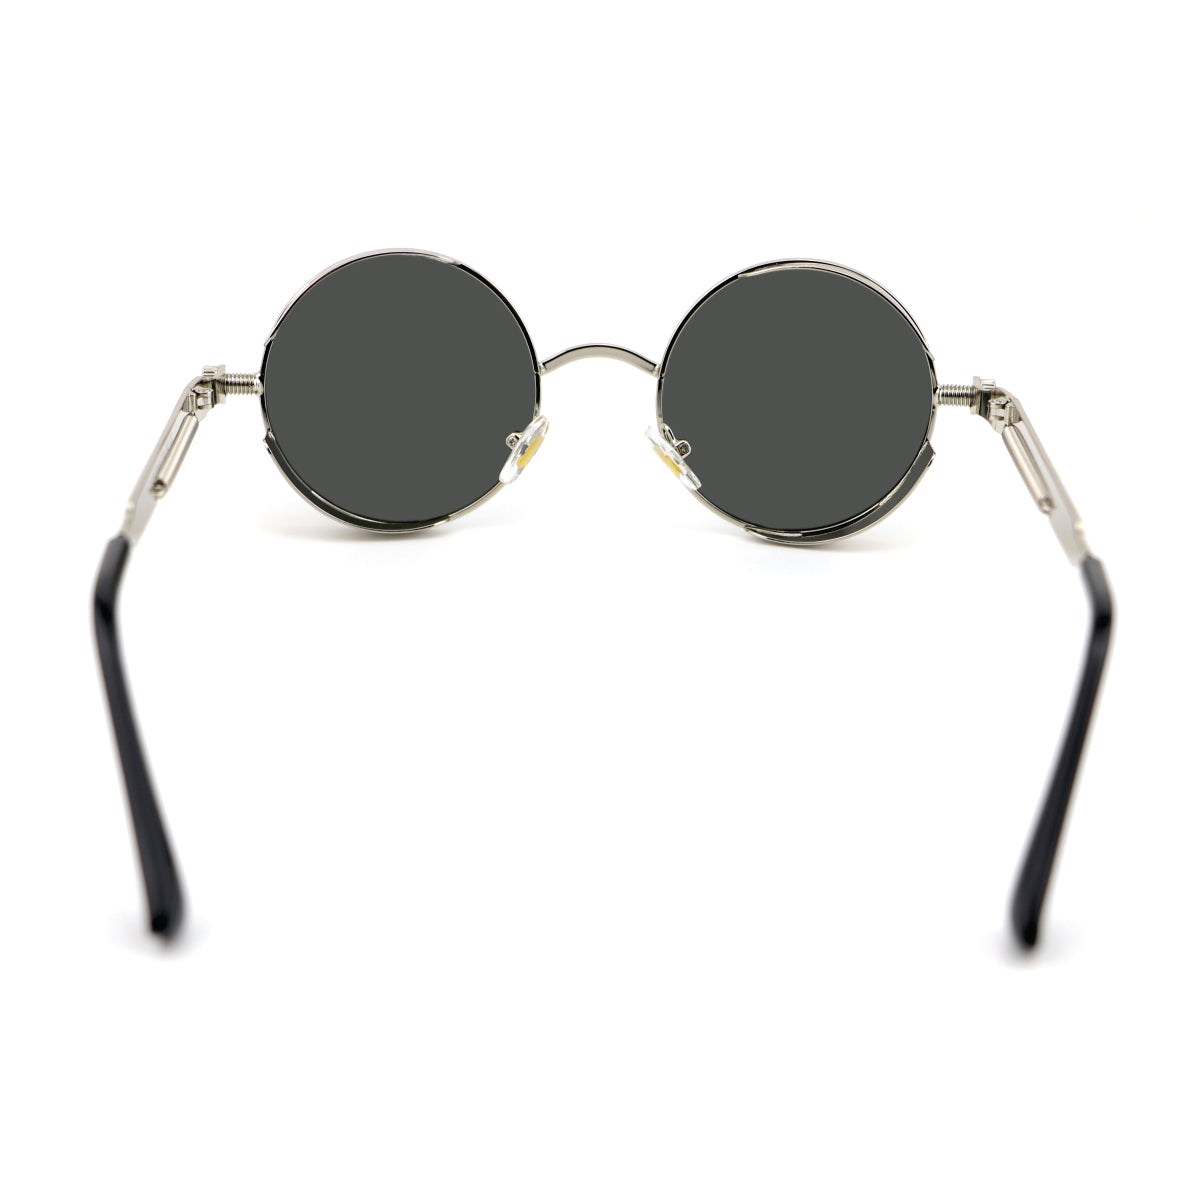 Steampunk HIPSTER SILVER Round Glasses Polarised Sunglasses